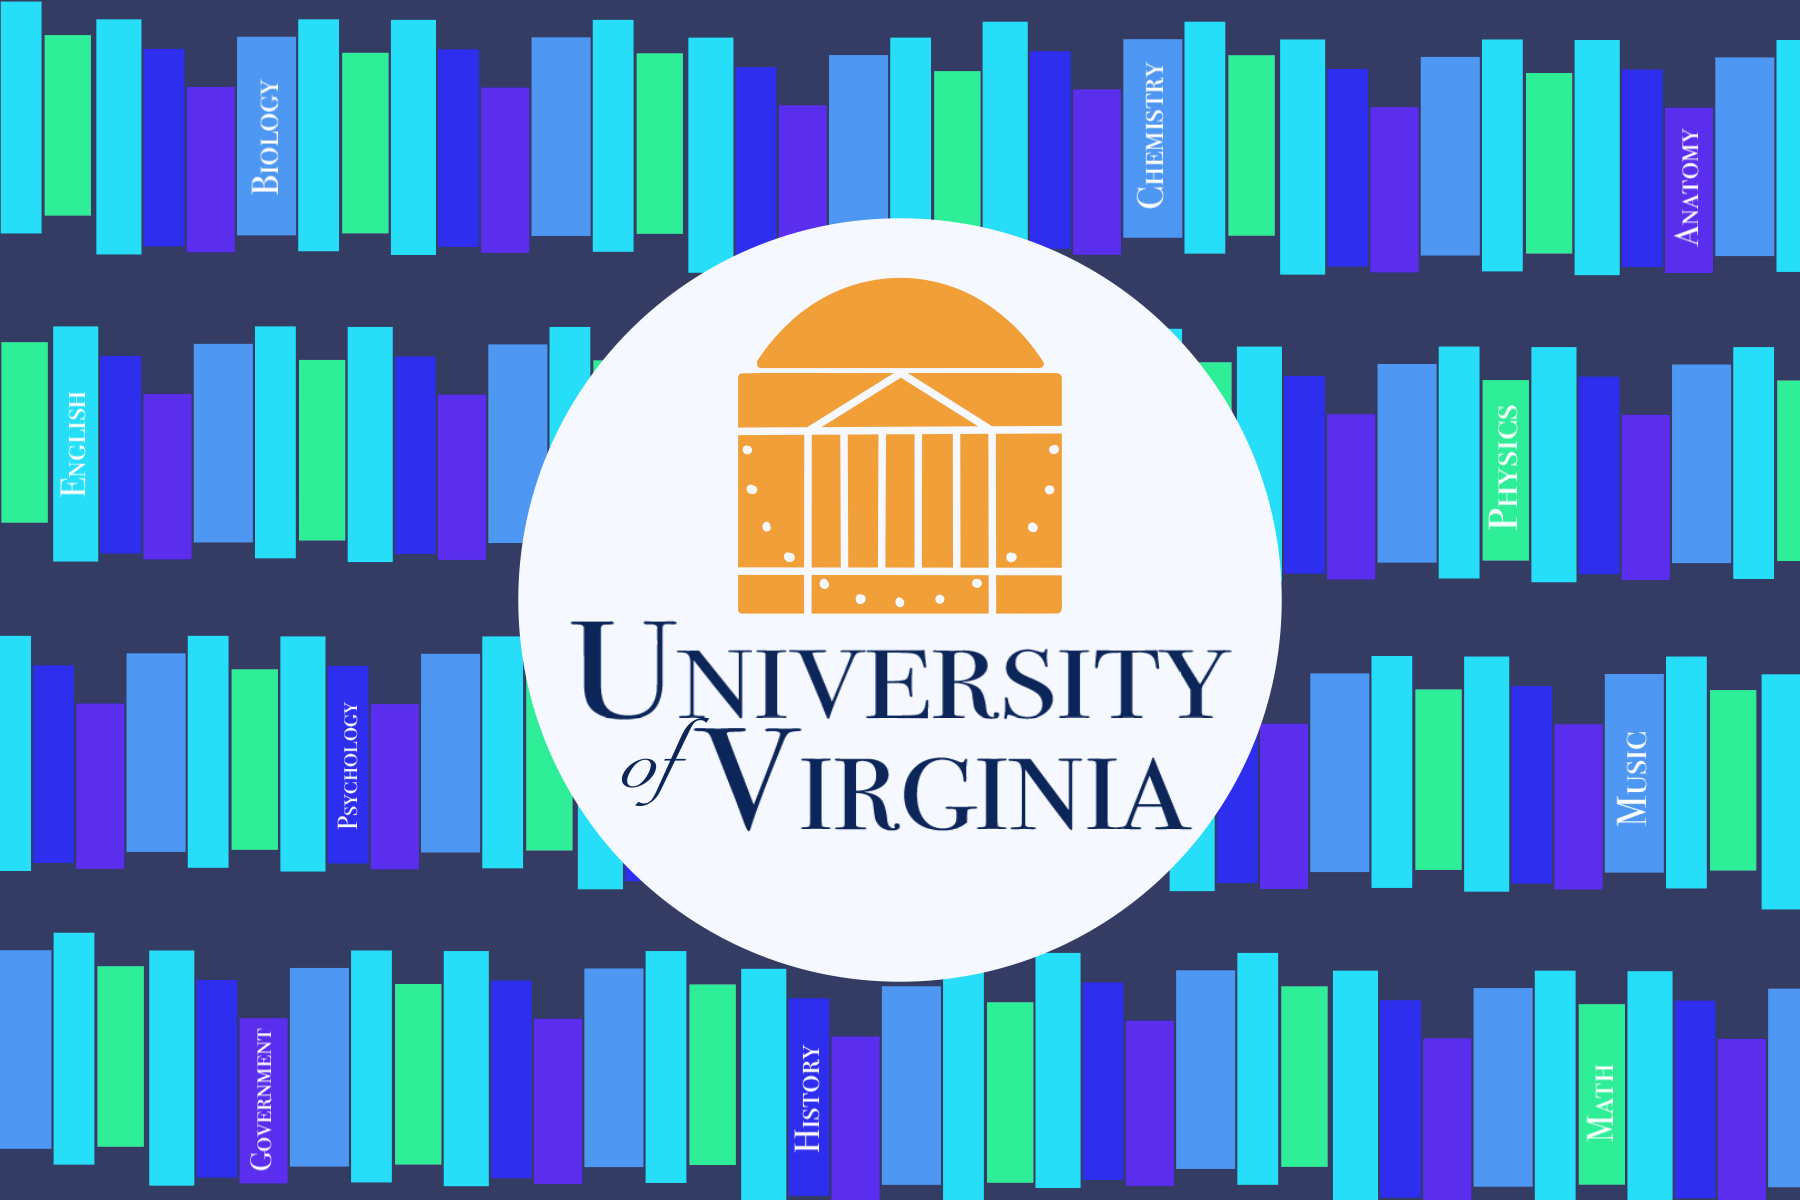 In an article about easy UVA classes, the University of Virginia logo is emblazoned against a vast shelf of blue and green books.